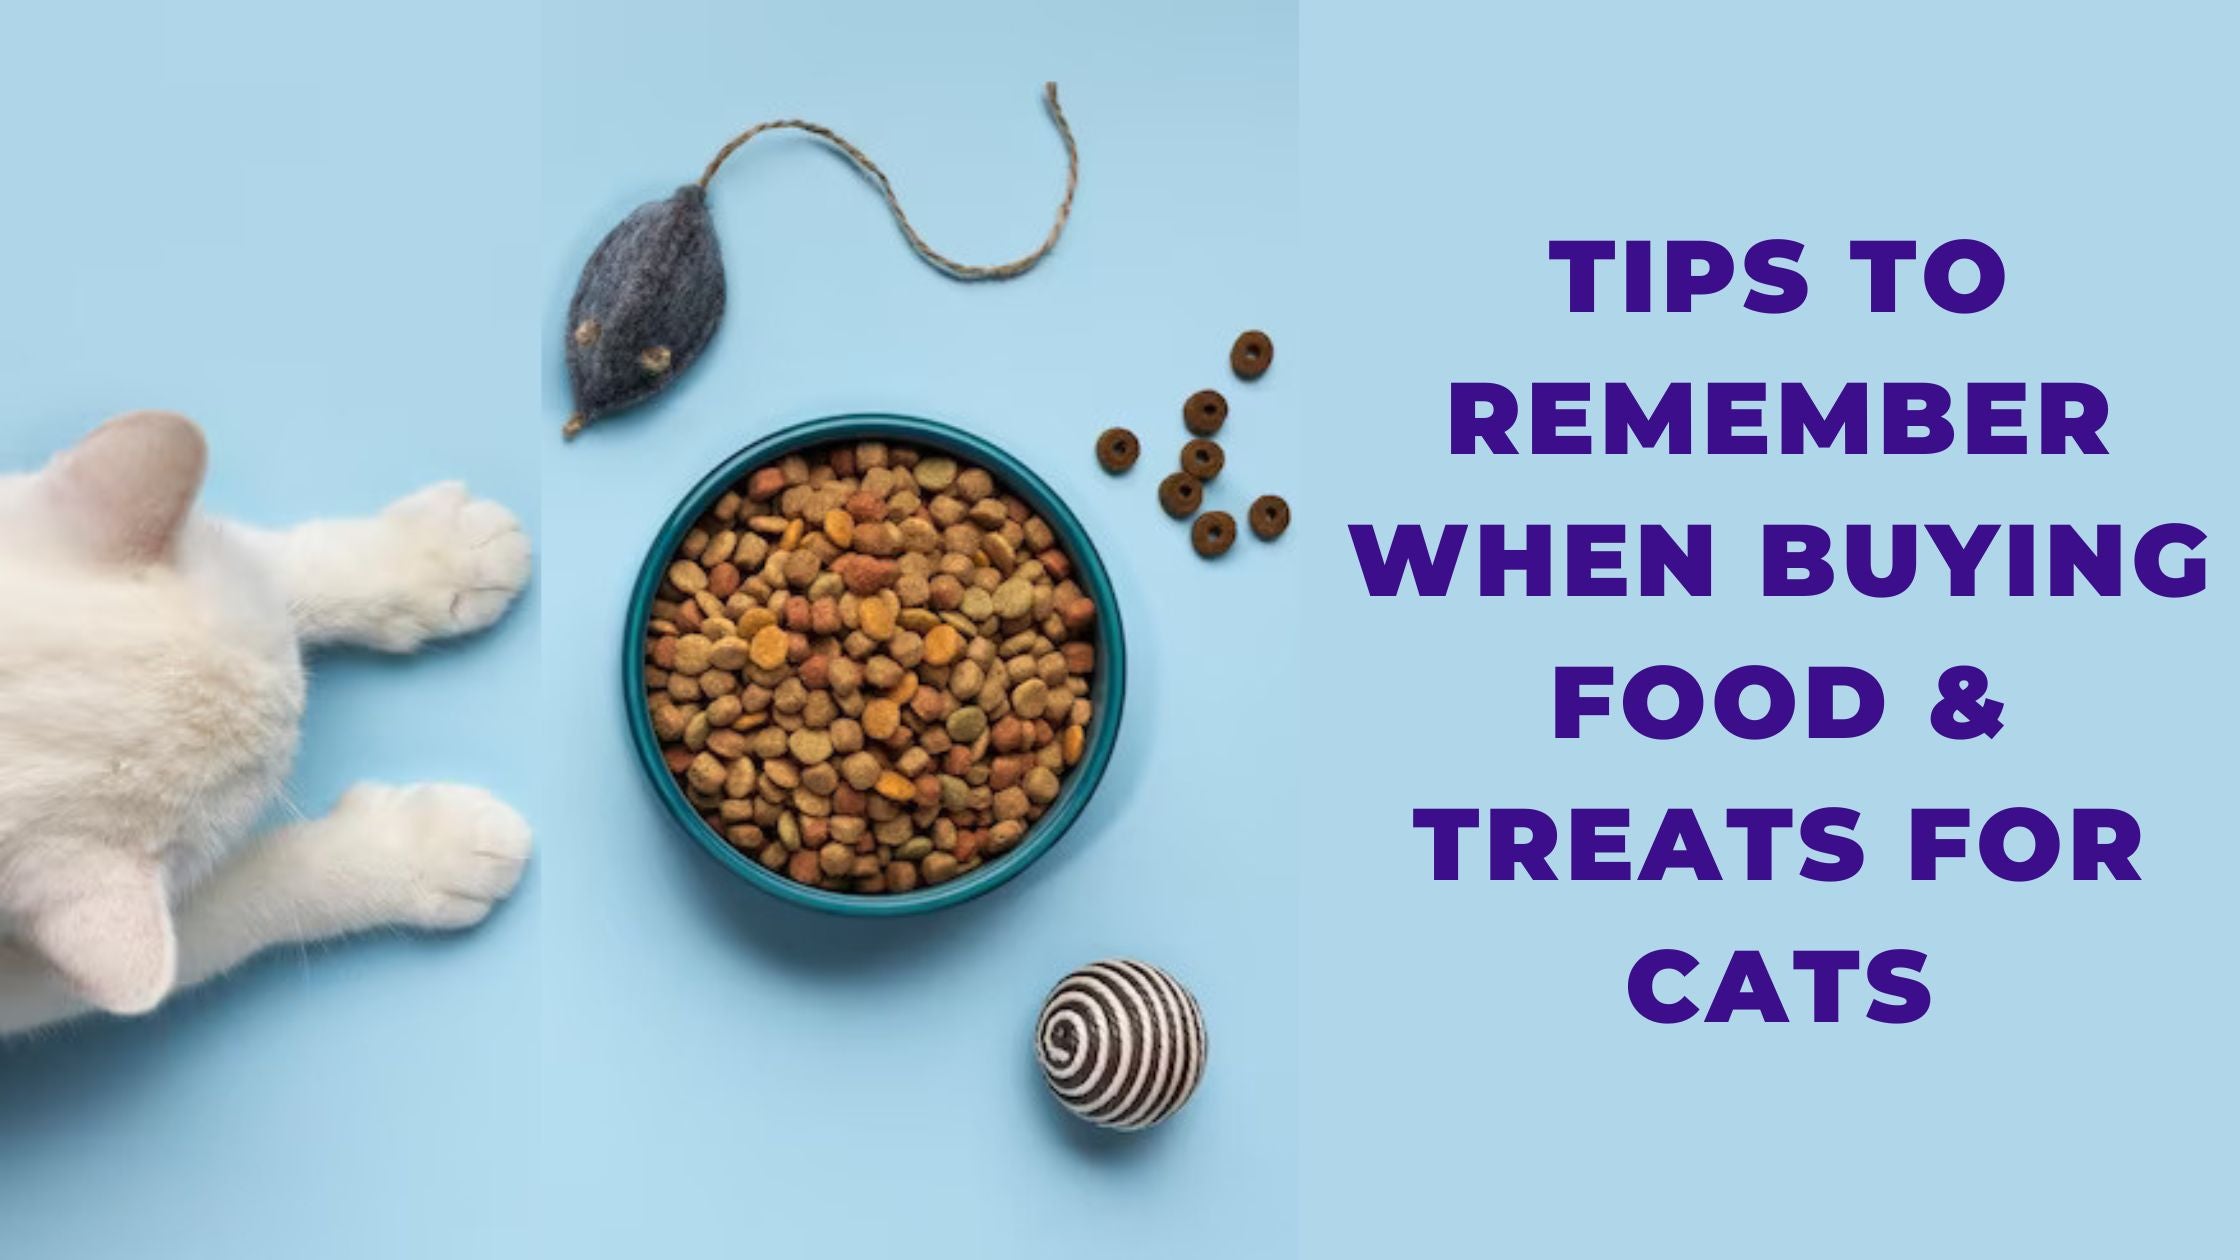 Tips To Remember When Buying Food & Treats For Cats